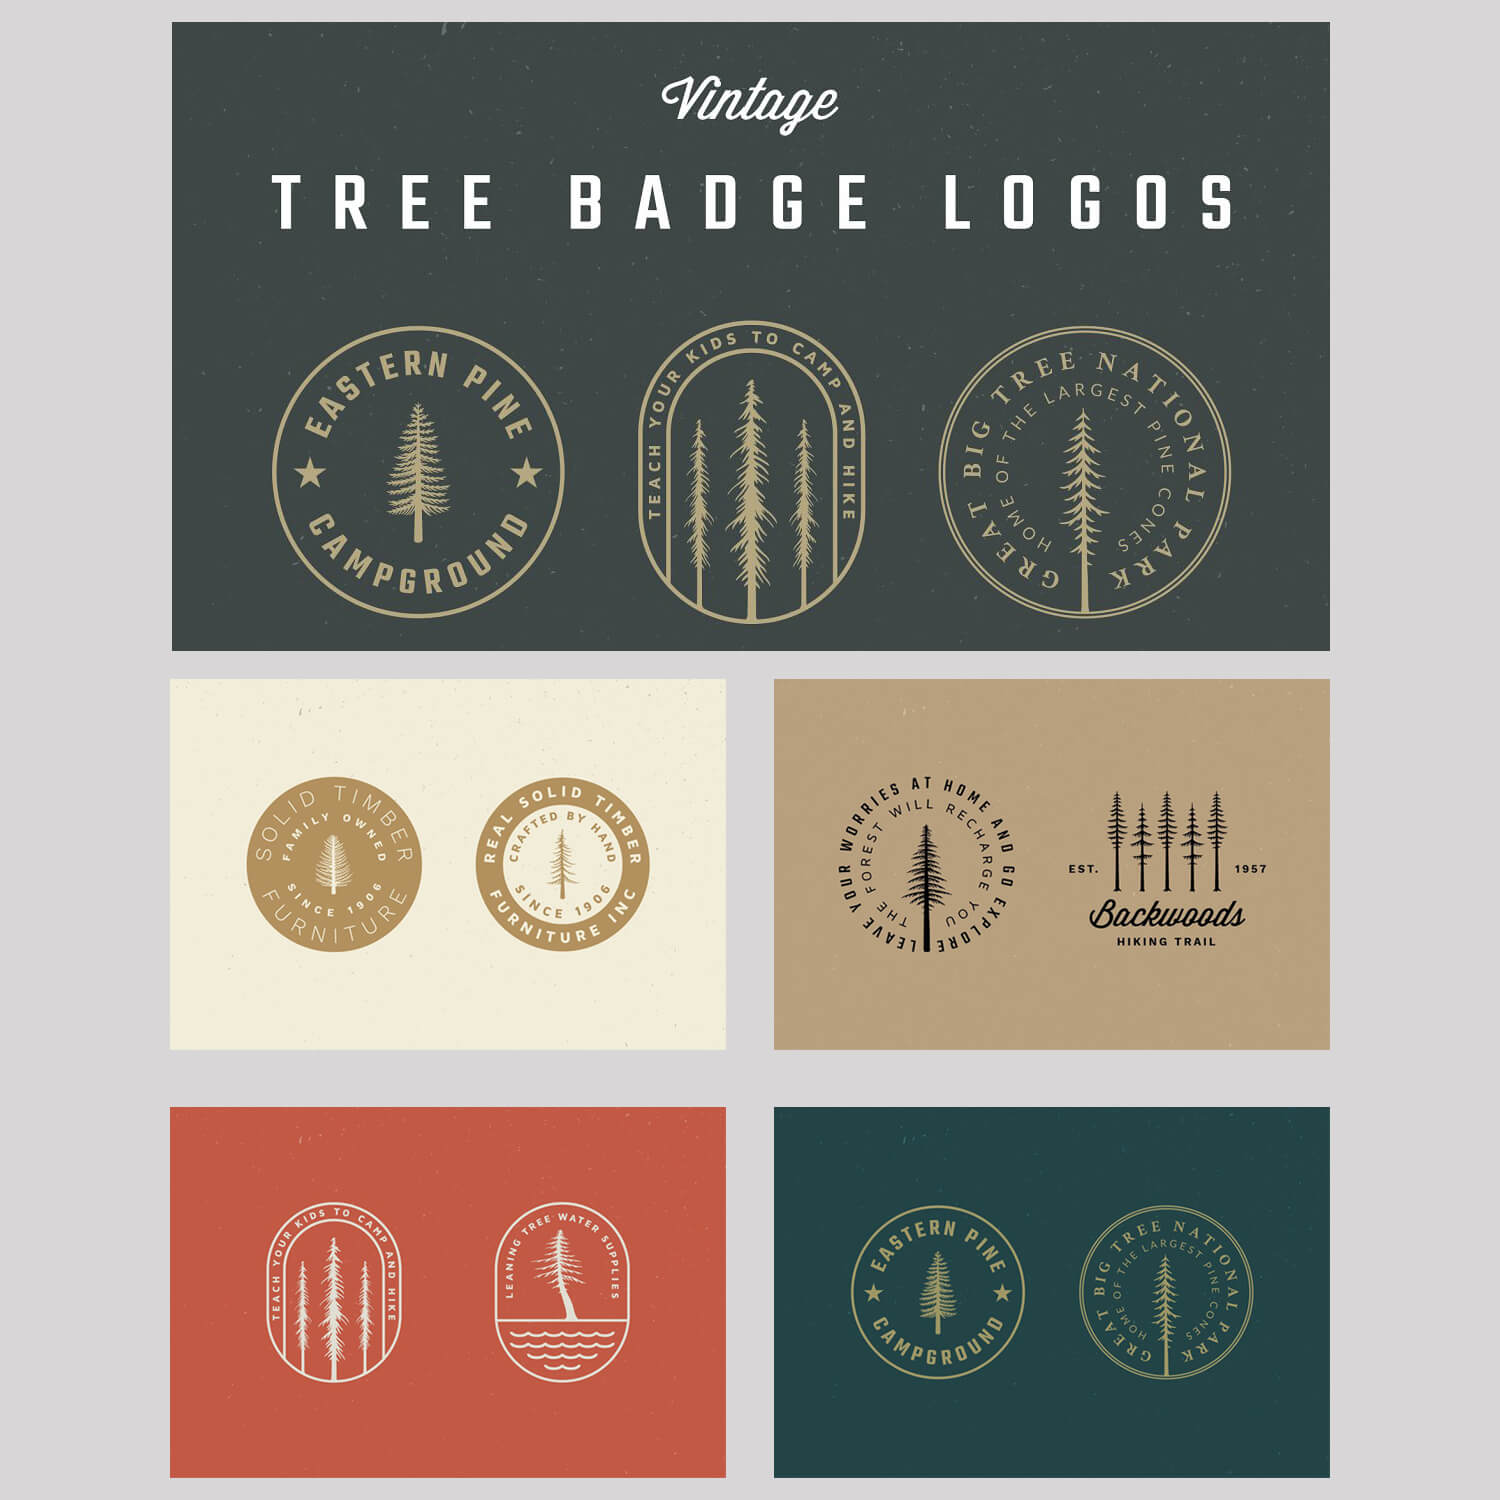 Three round and oval logos with vintage trees and lettering on green, beige, brown and red backgrounds.